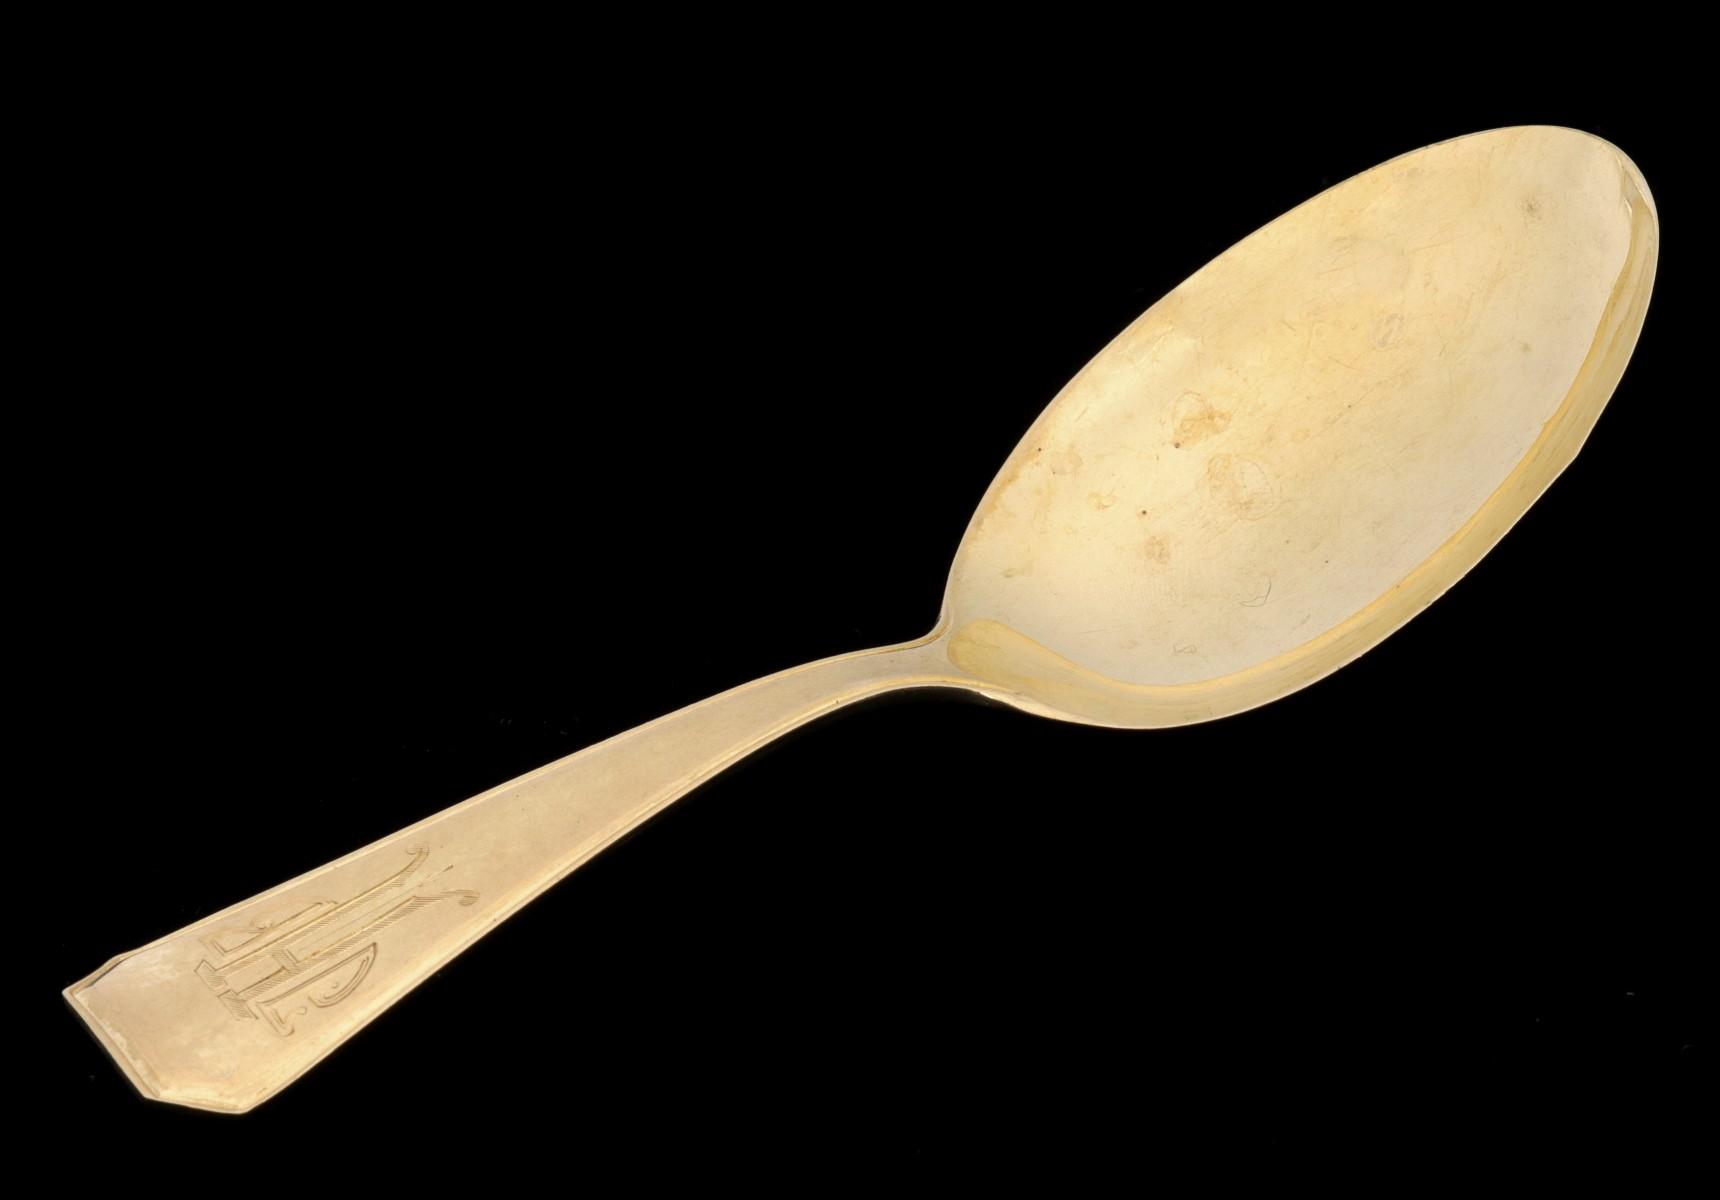 A SOLID 14K GOLD CHILD'S FEEDING SPOON DATED 1930